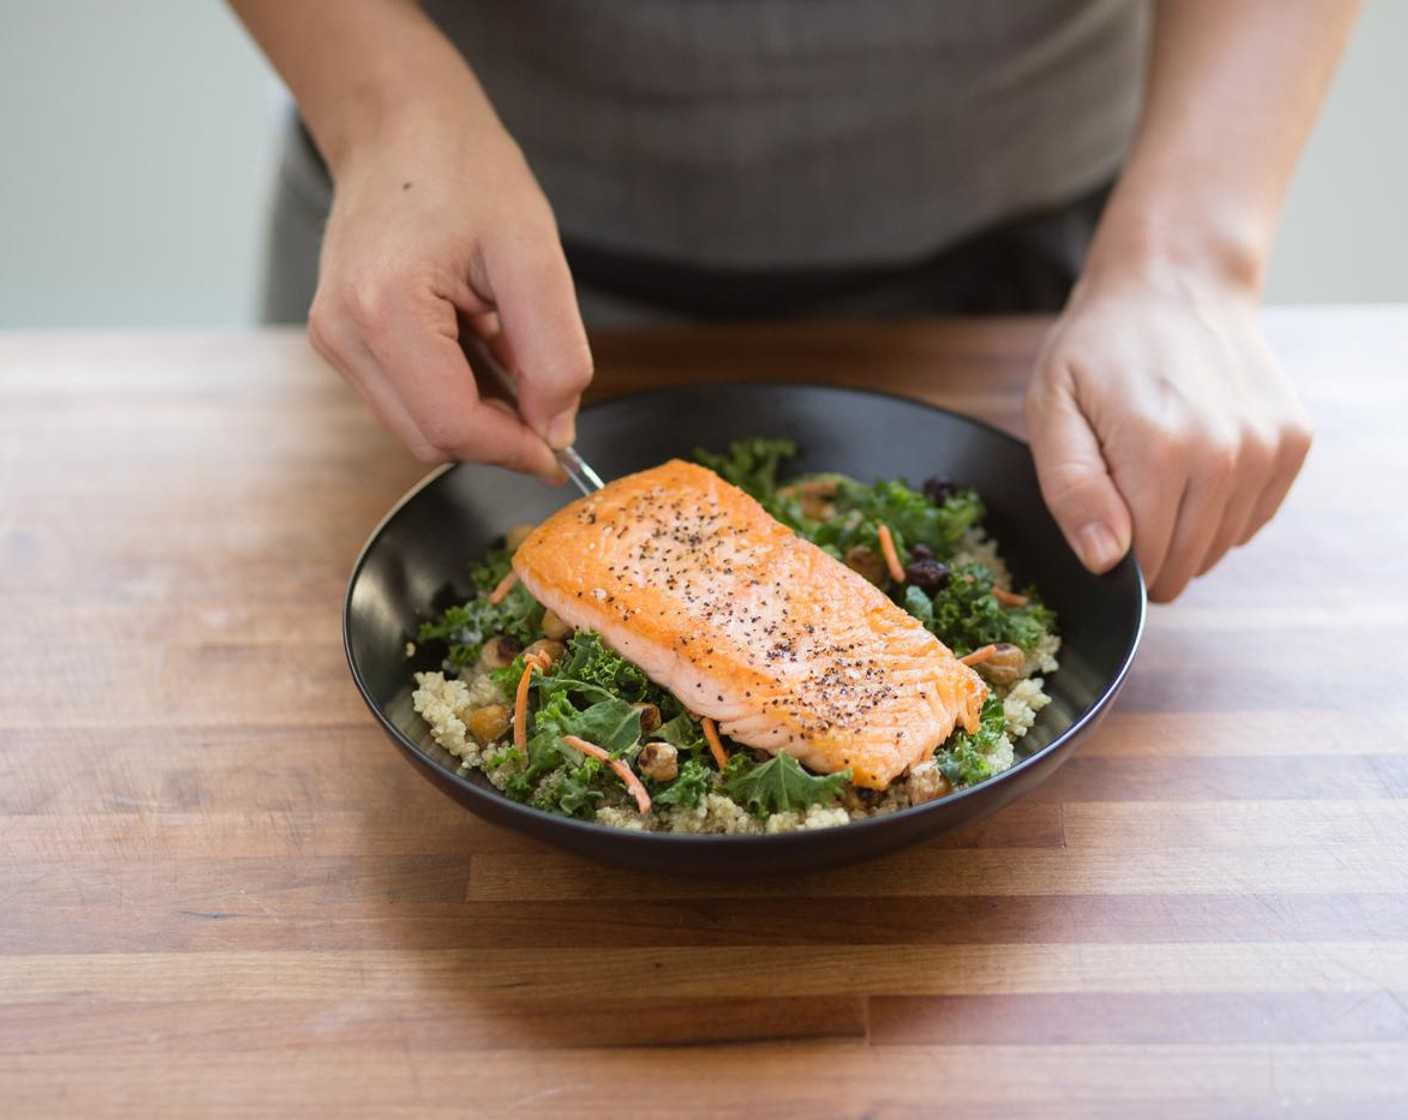 step 8 In the center of two bowls, place the quinoa. Add the kale salad, placing the seared salmon on top.